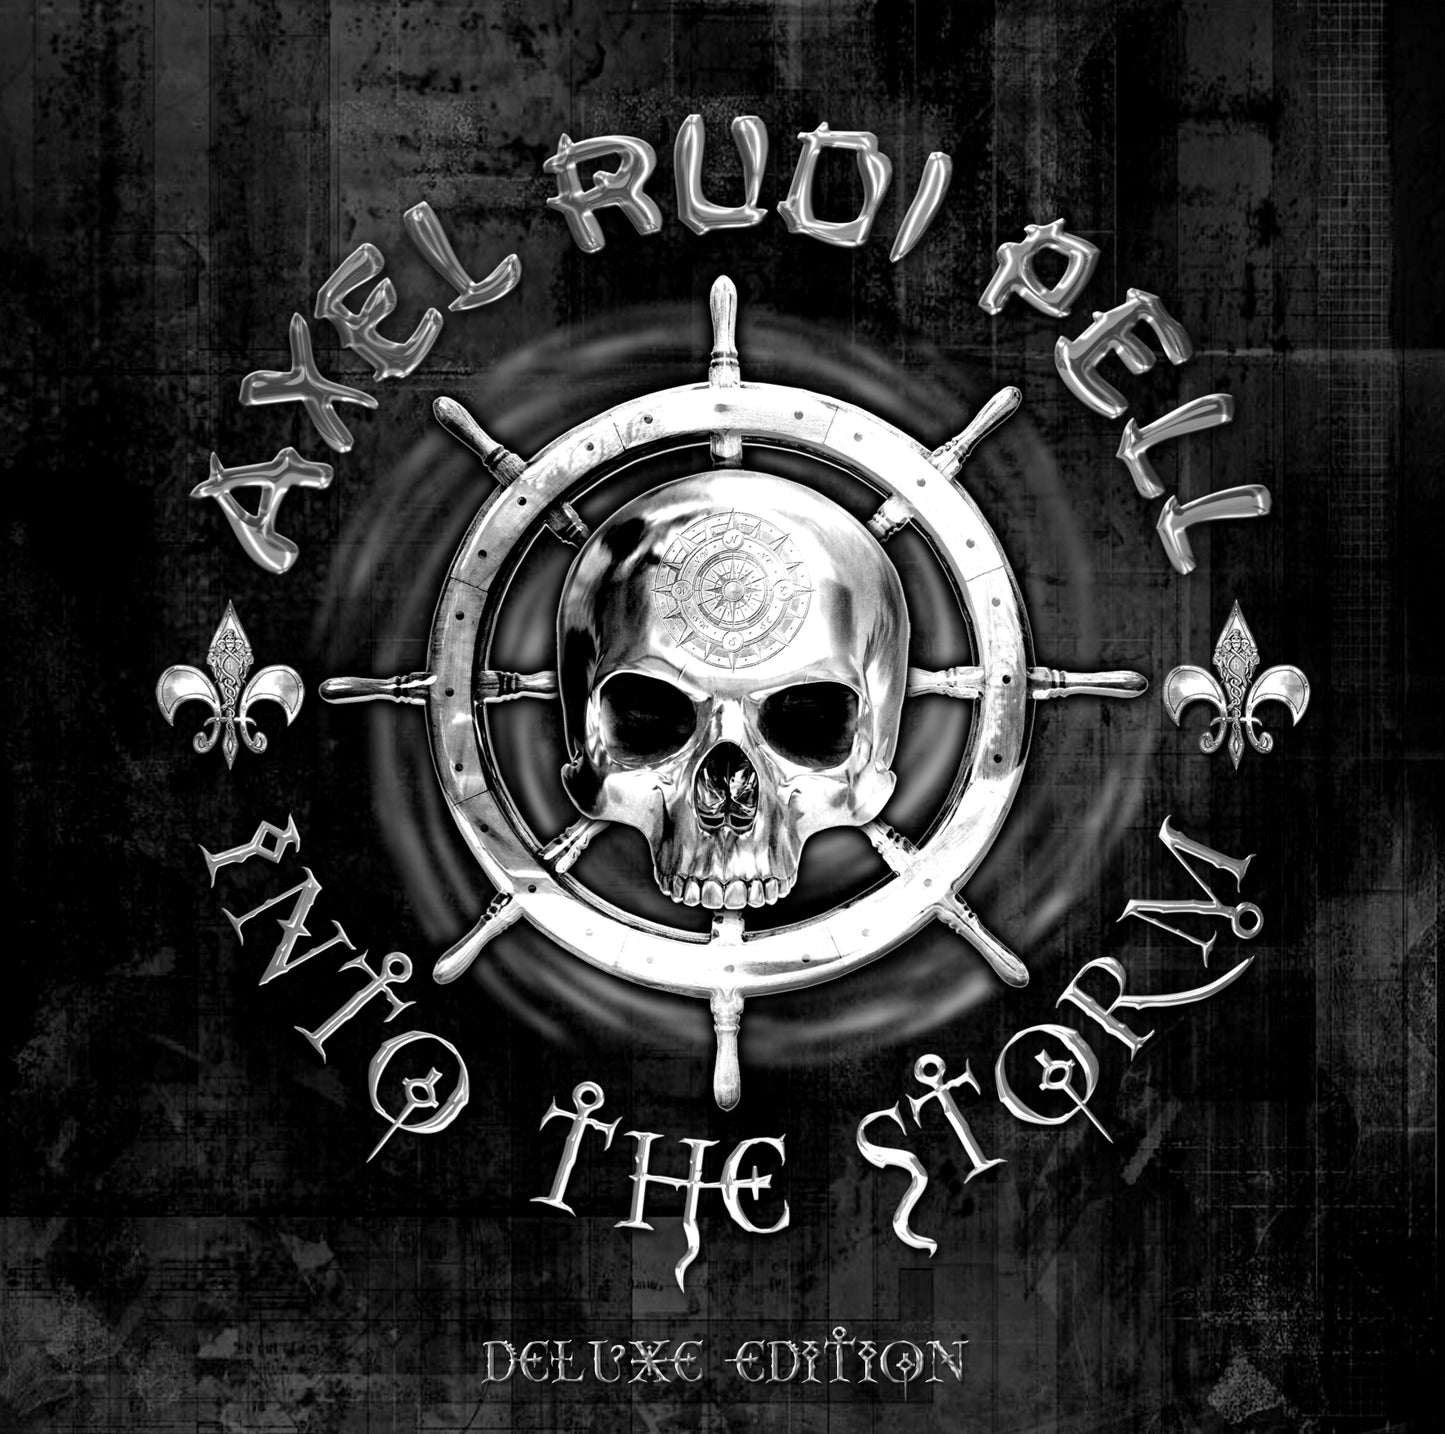 Axel Rudi Pell "Into The Storm" CD (deluxe)